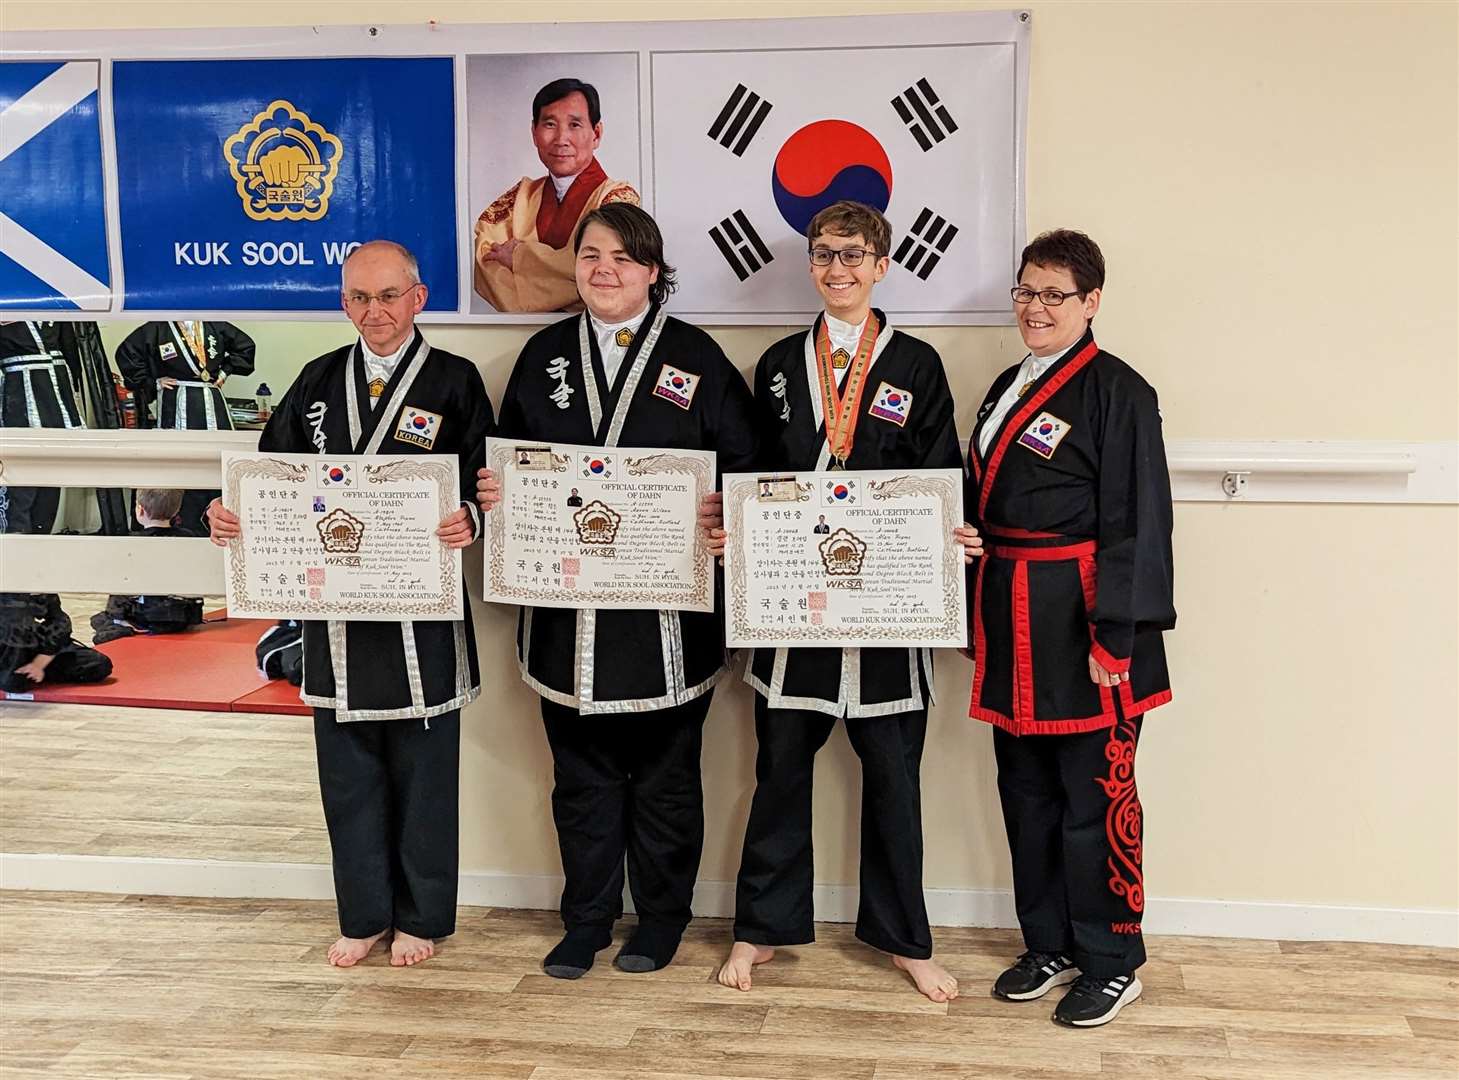 From left: Caithness Kuk Sool Won students Stephen Frame, Aaron Wilson and Alan Frame after their promotions, with instructor Cathy Smith.